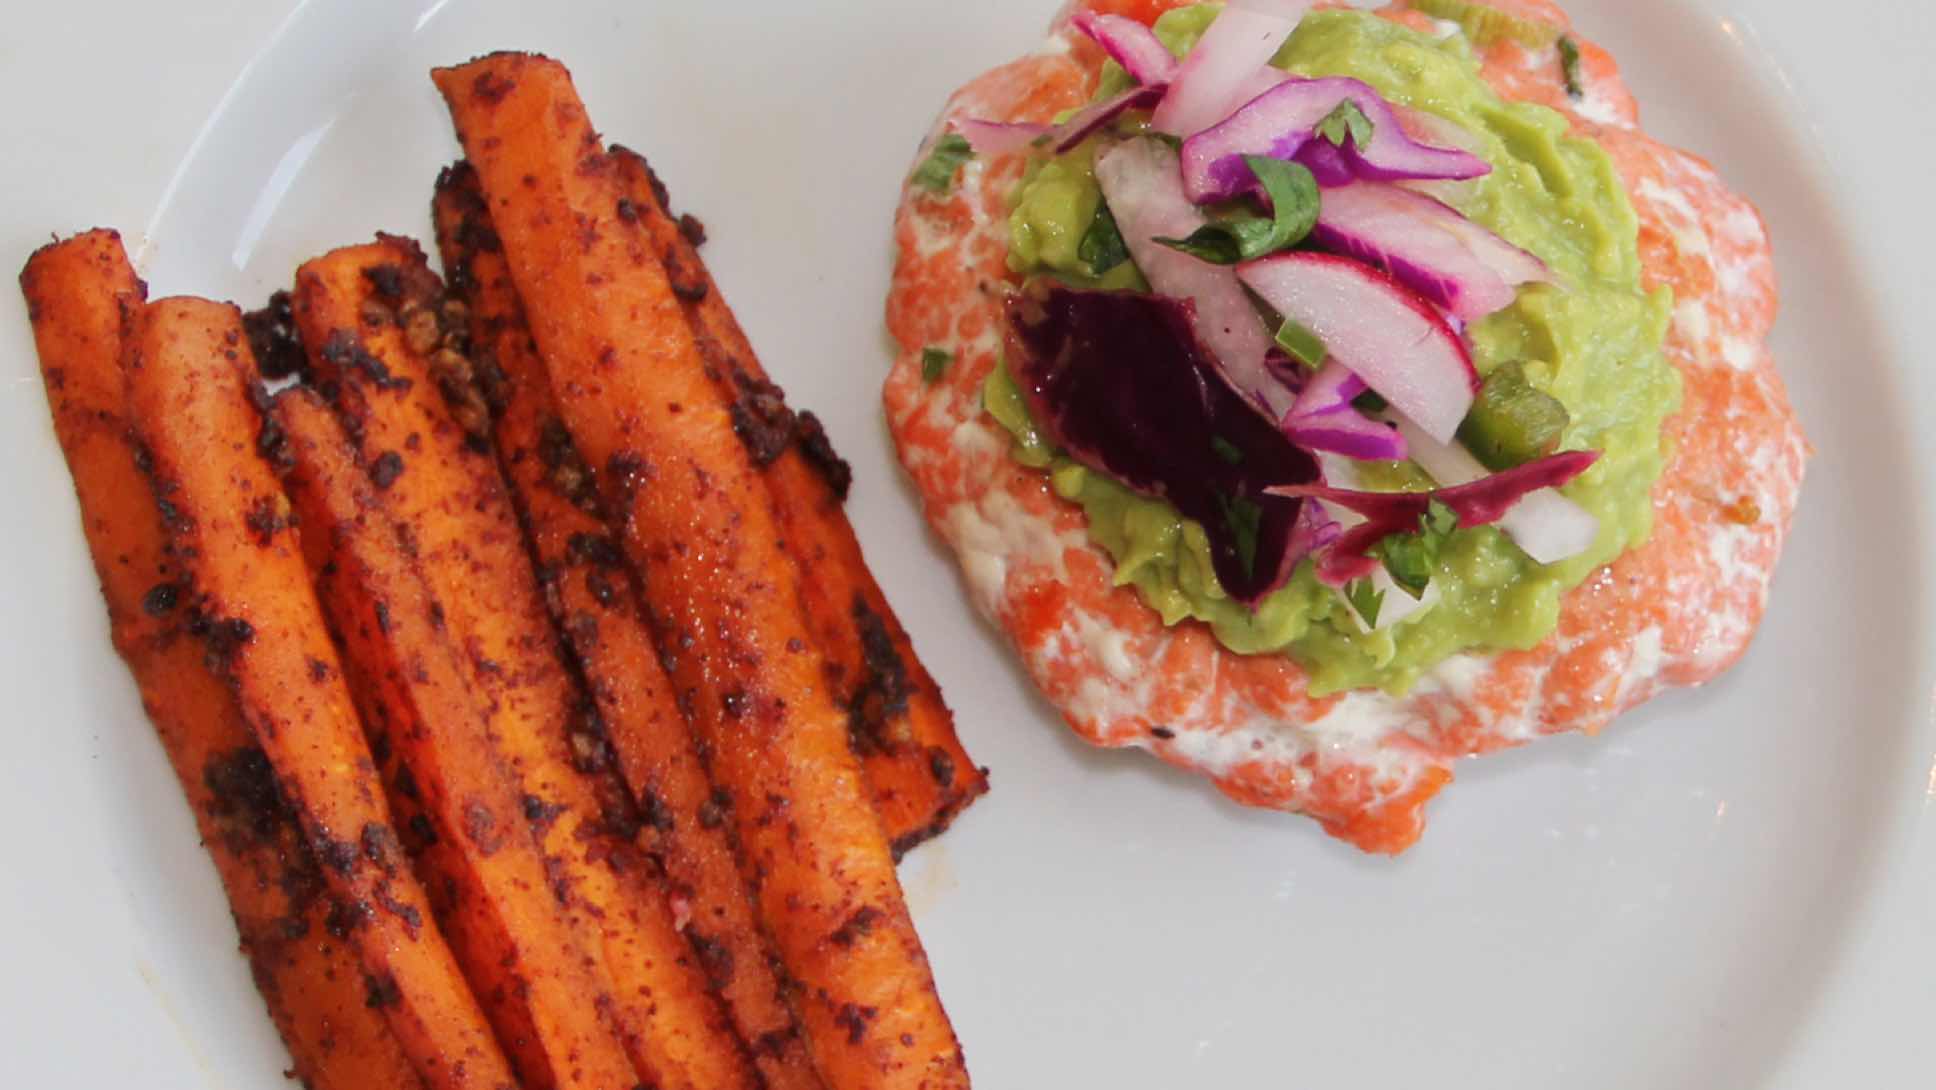 Salmon burger with carrot fries on a plate.